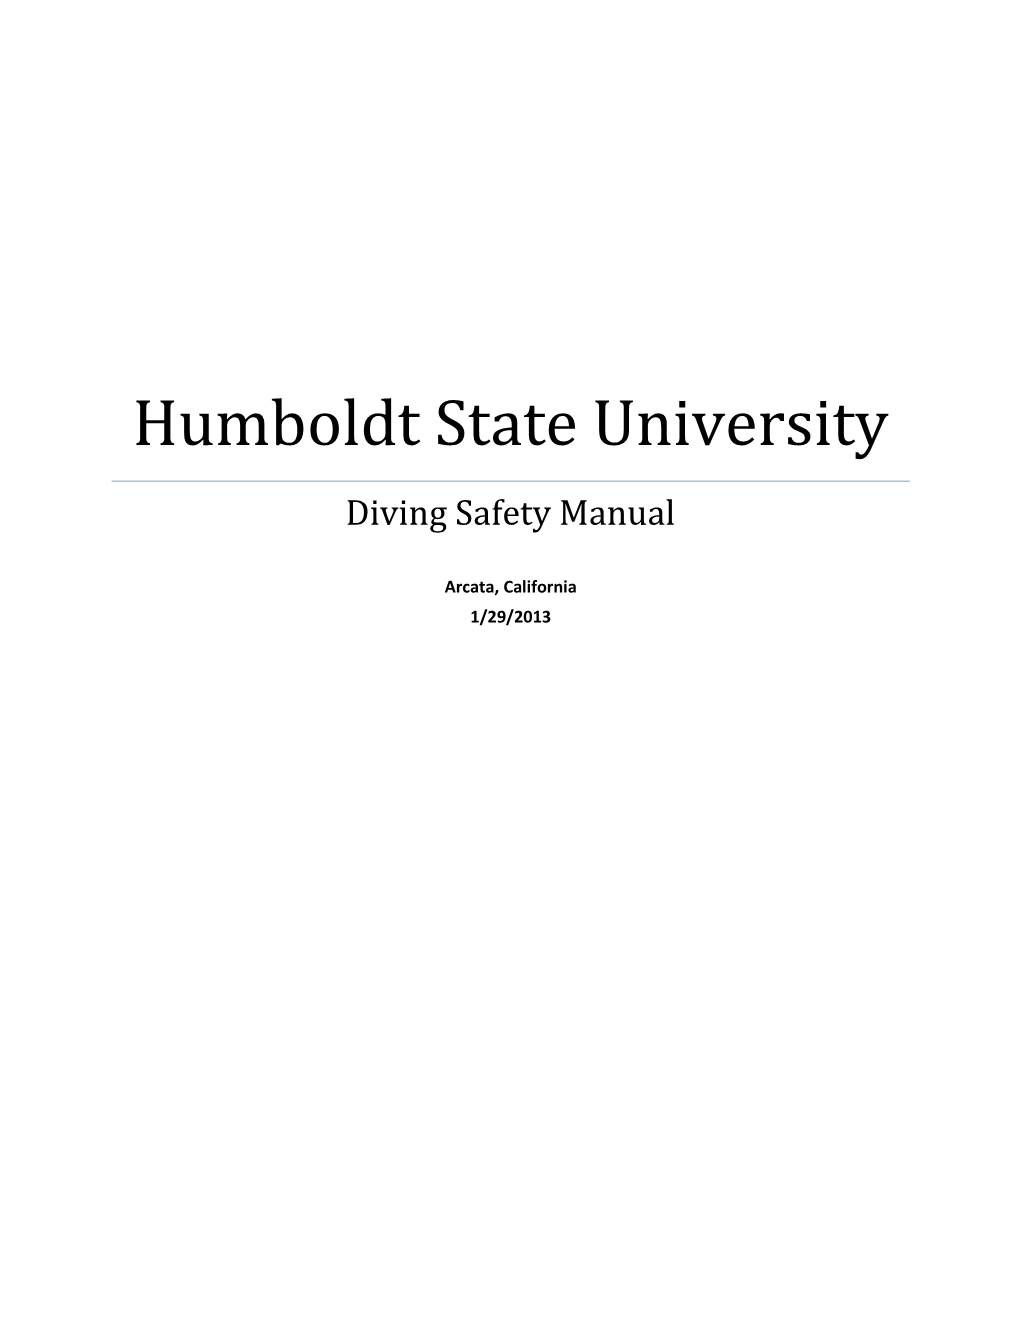 Diving Safety Manual